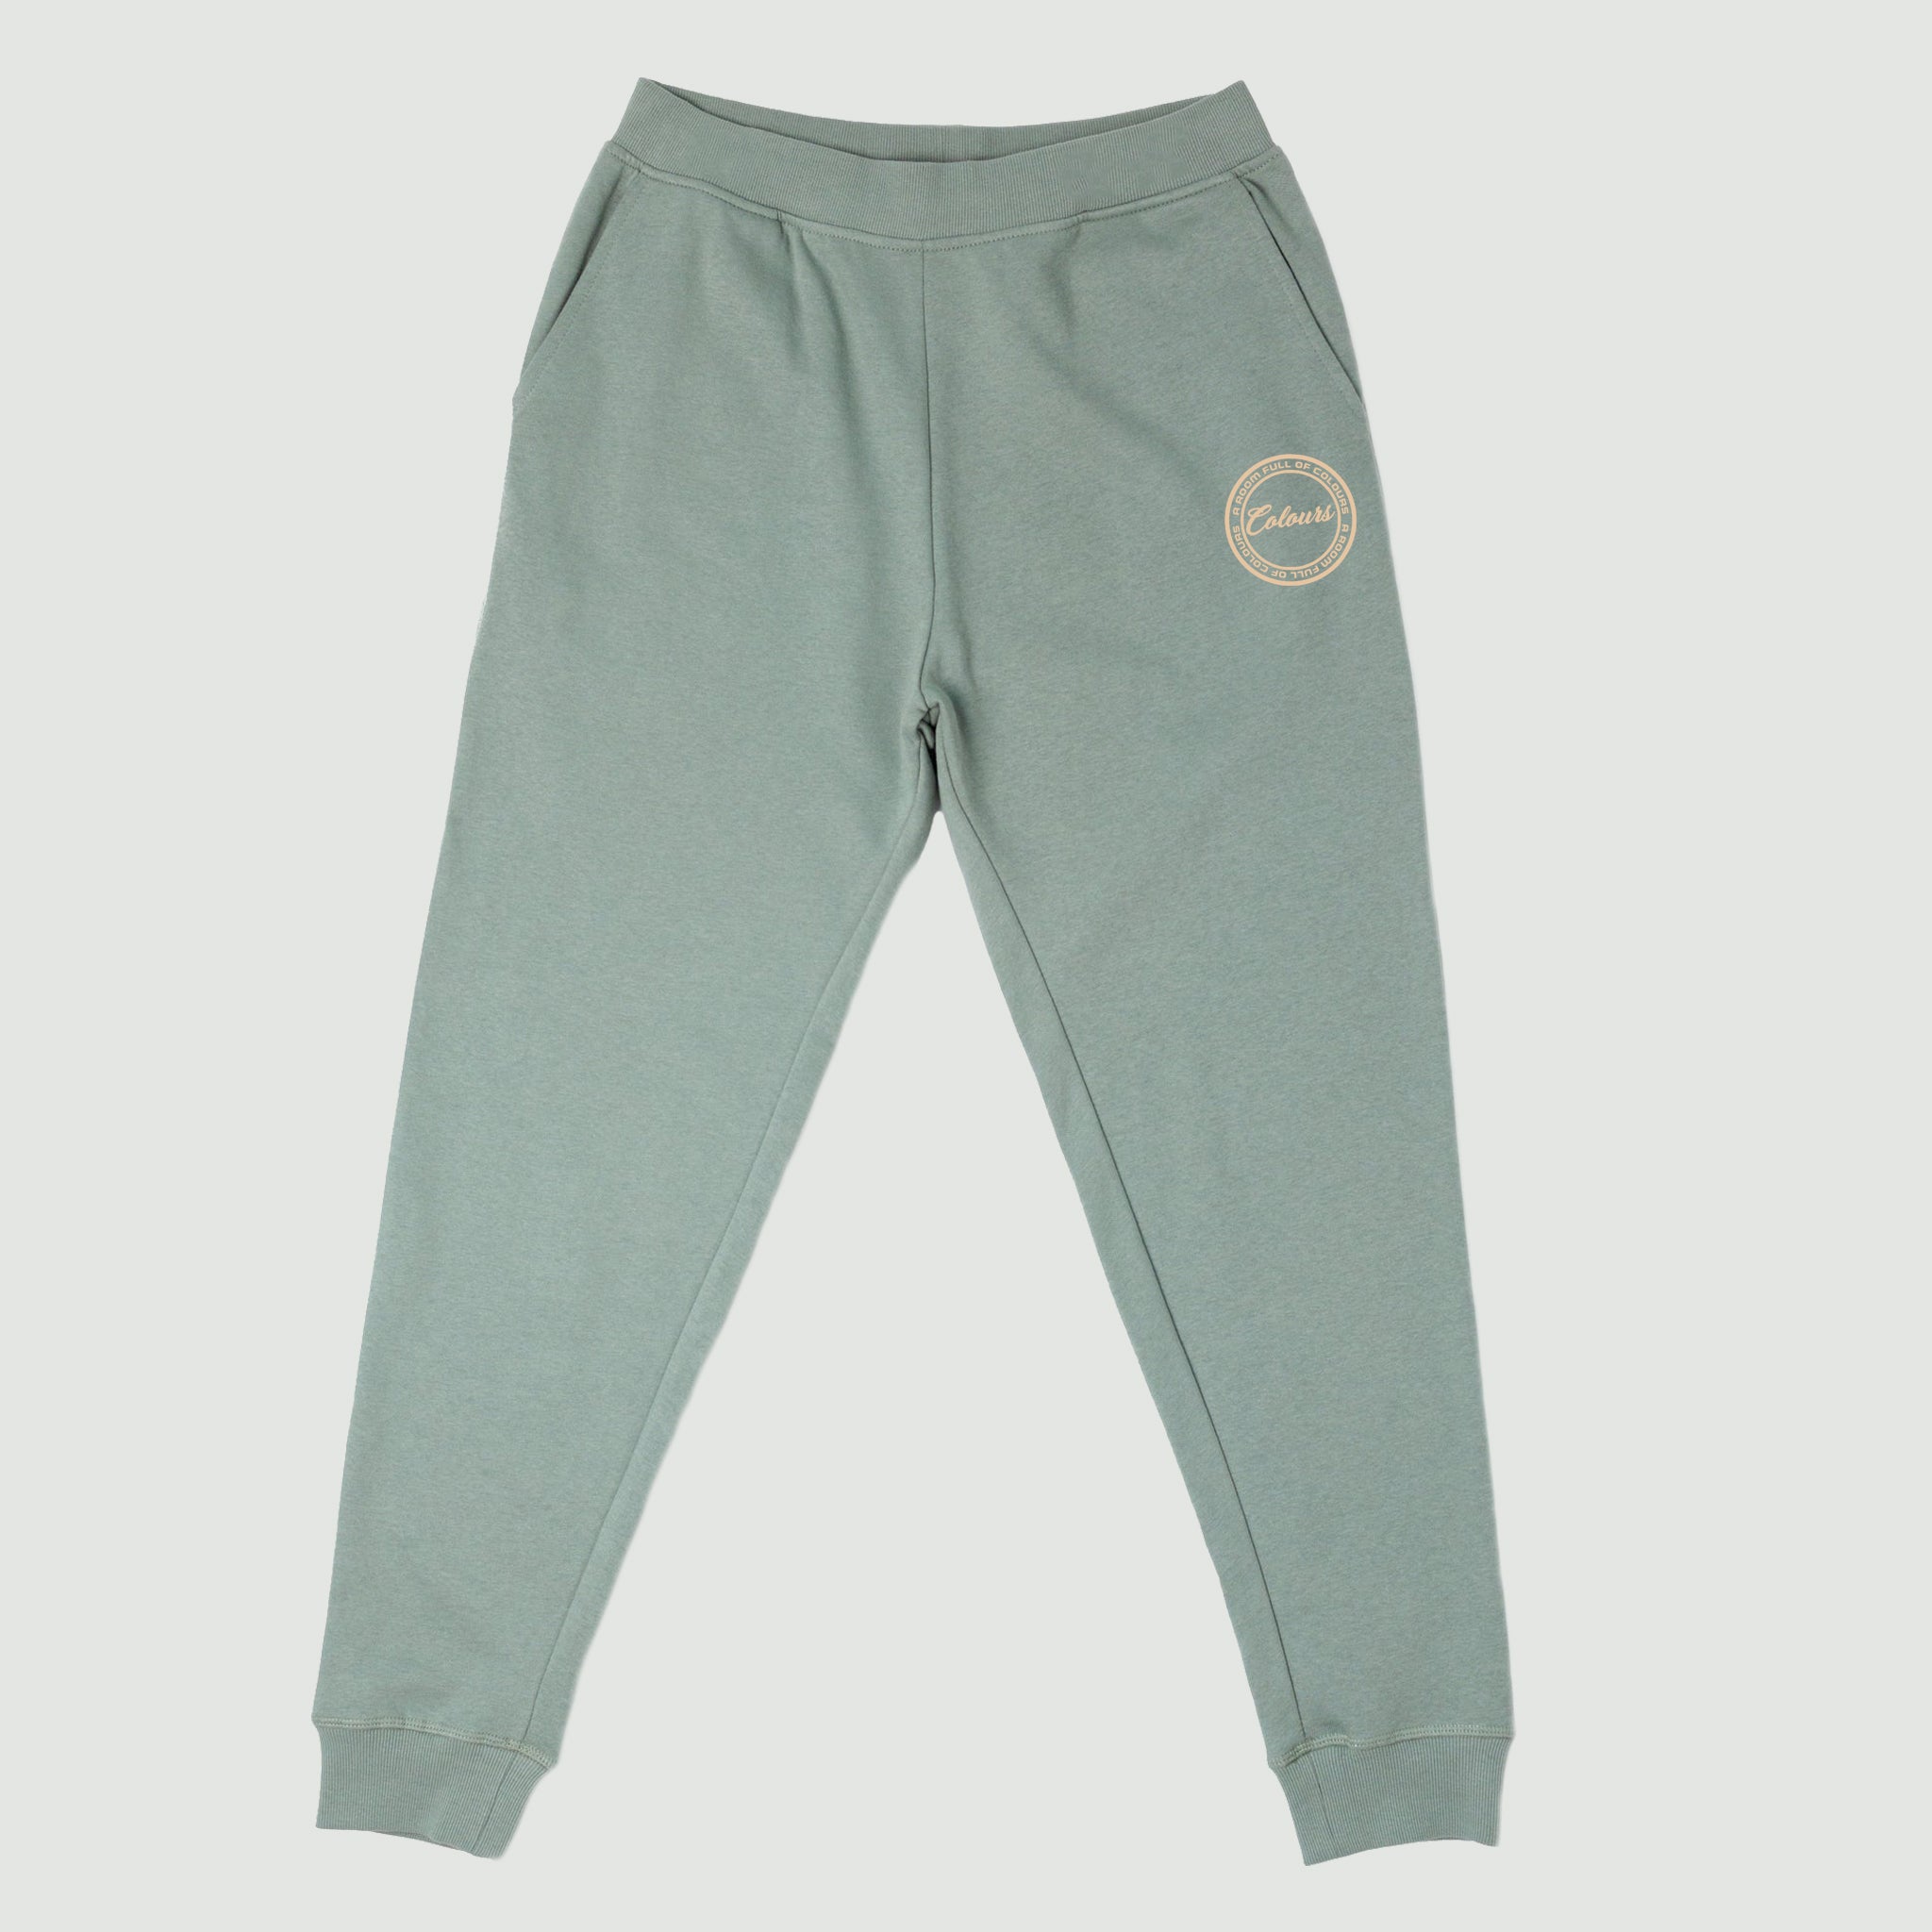 COLOURS "RELAXED FIT" JOGGERS